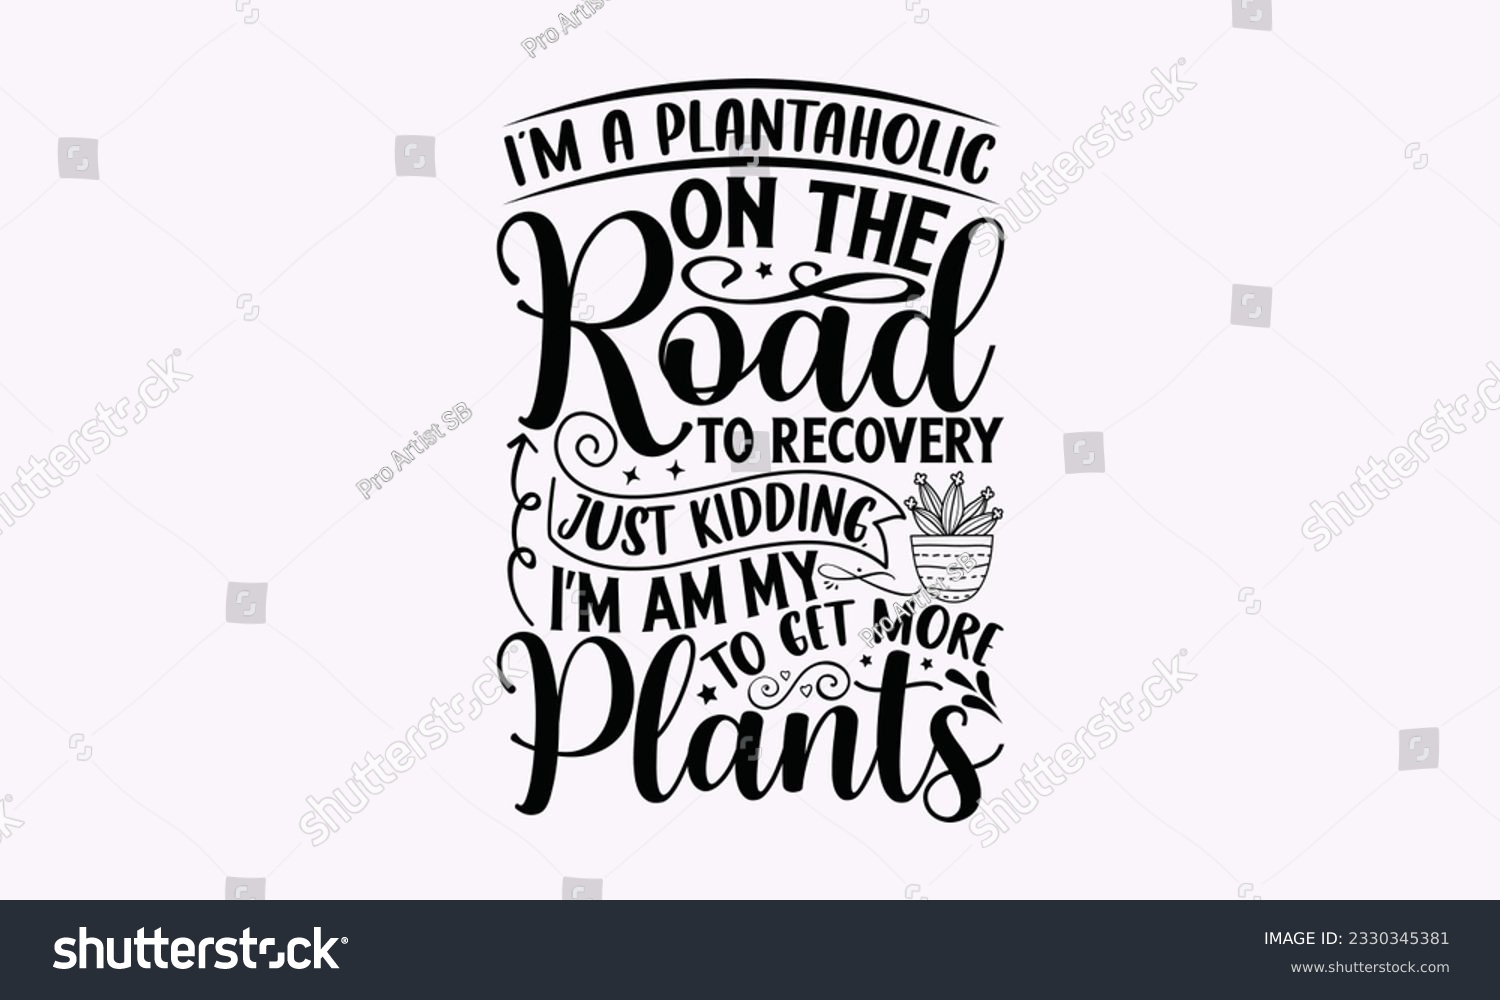 SVG of I’m a plantaholic on the road to recovery just kidding, i’m am my to get more plants - Gardening SVG Design, plant Quotes, Hand drawn lettering phrase, Isolated on white background. svg